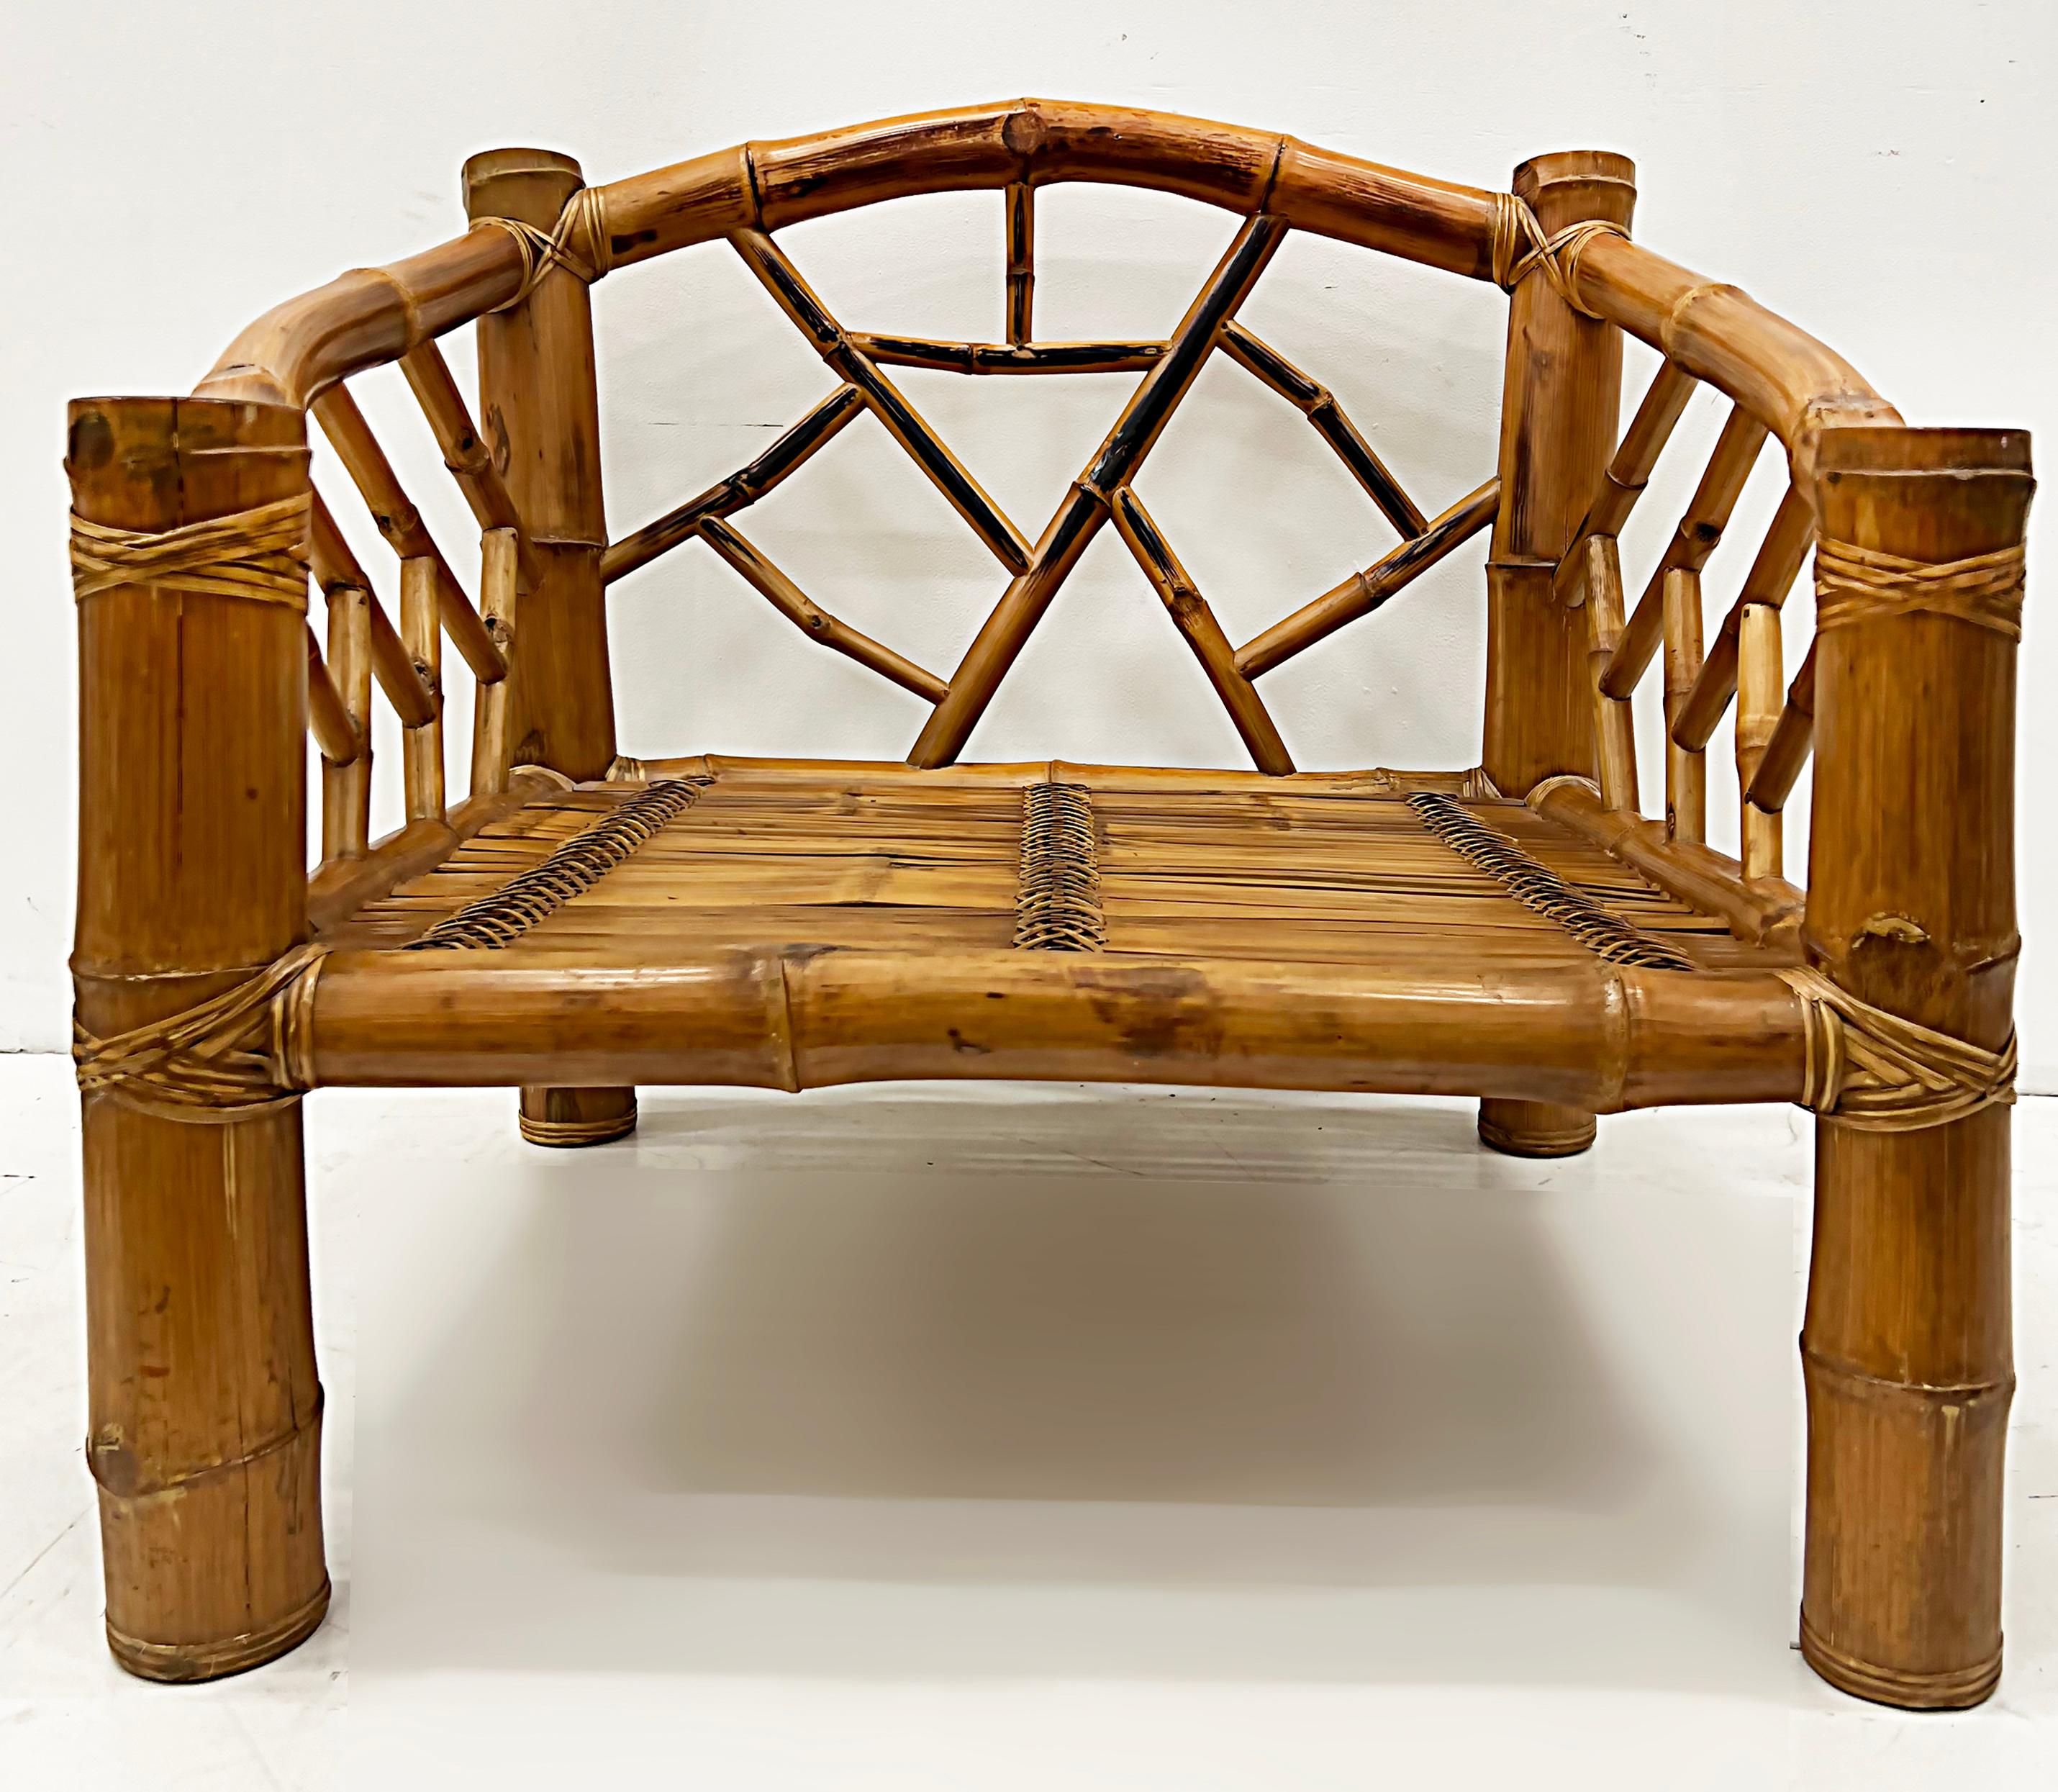 1987 coastal bamboo rattan chair by Antonio Budji Layug

Offered for sale is a 1987 bamboo chair with rattan accents by Antonio Budji Layug. This chair is dramatic and sculptural. The scale of the materials makes it quite substantial.